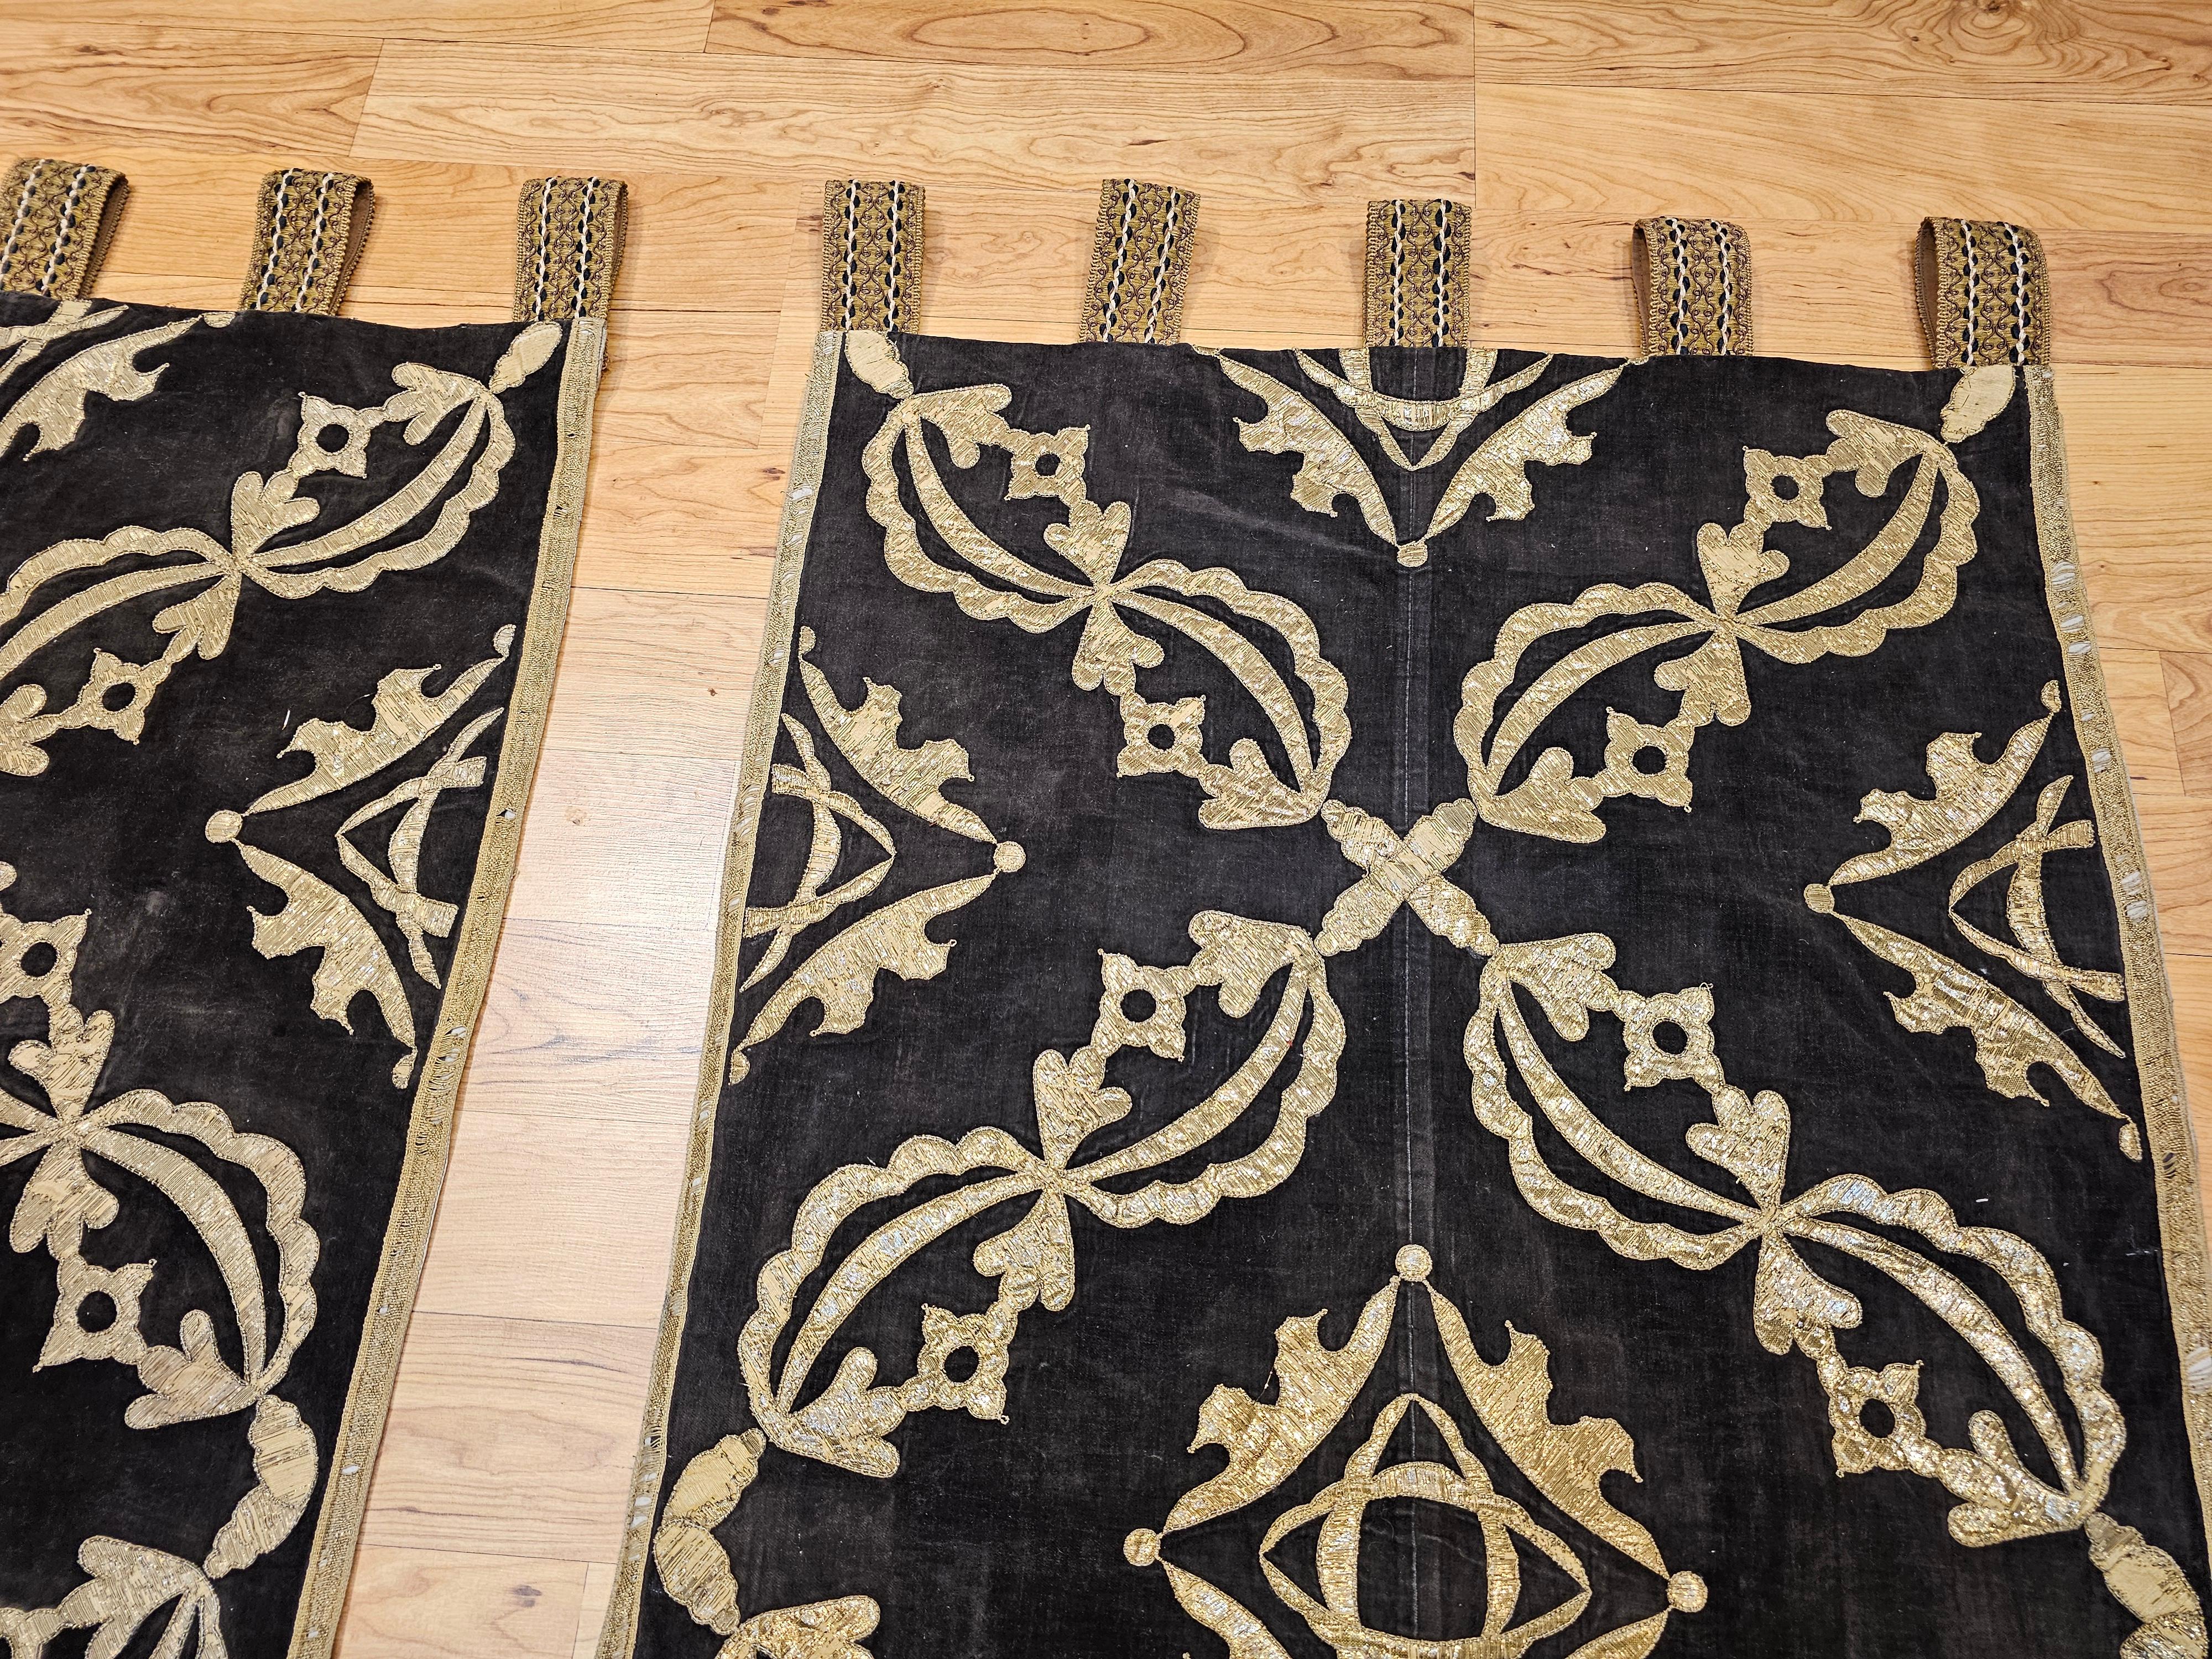 Gold 18th Century Ottoman Gilt Threads Brocade Embroidery Textile Panels (A Pair) For Sale